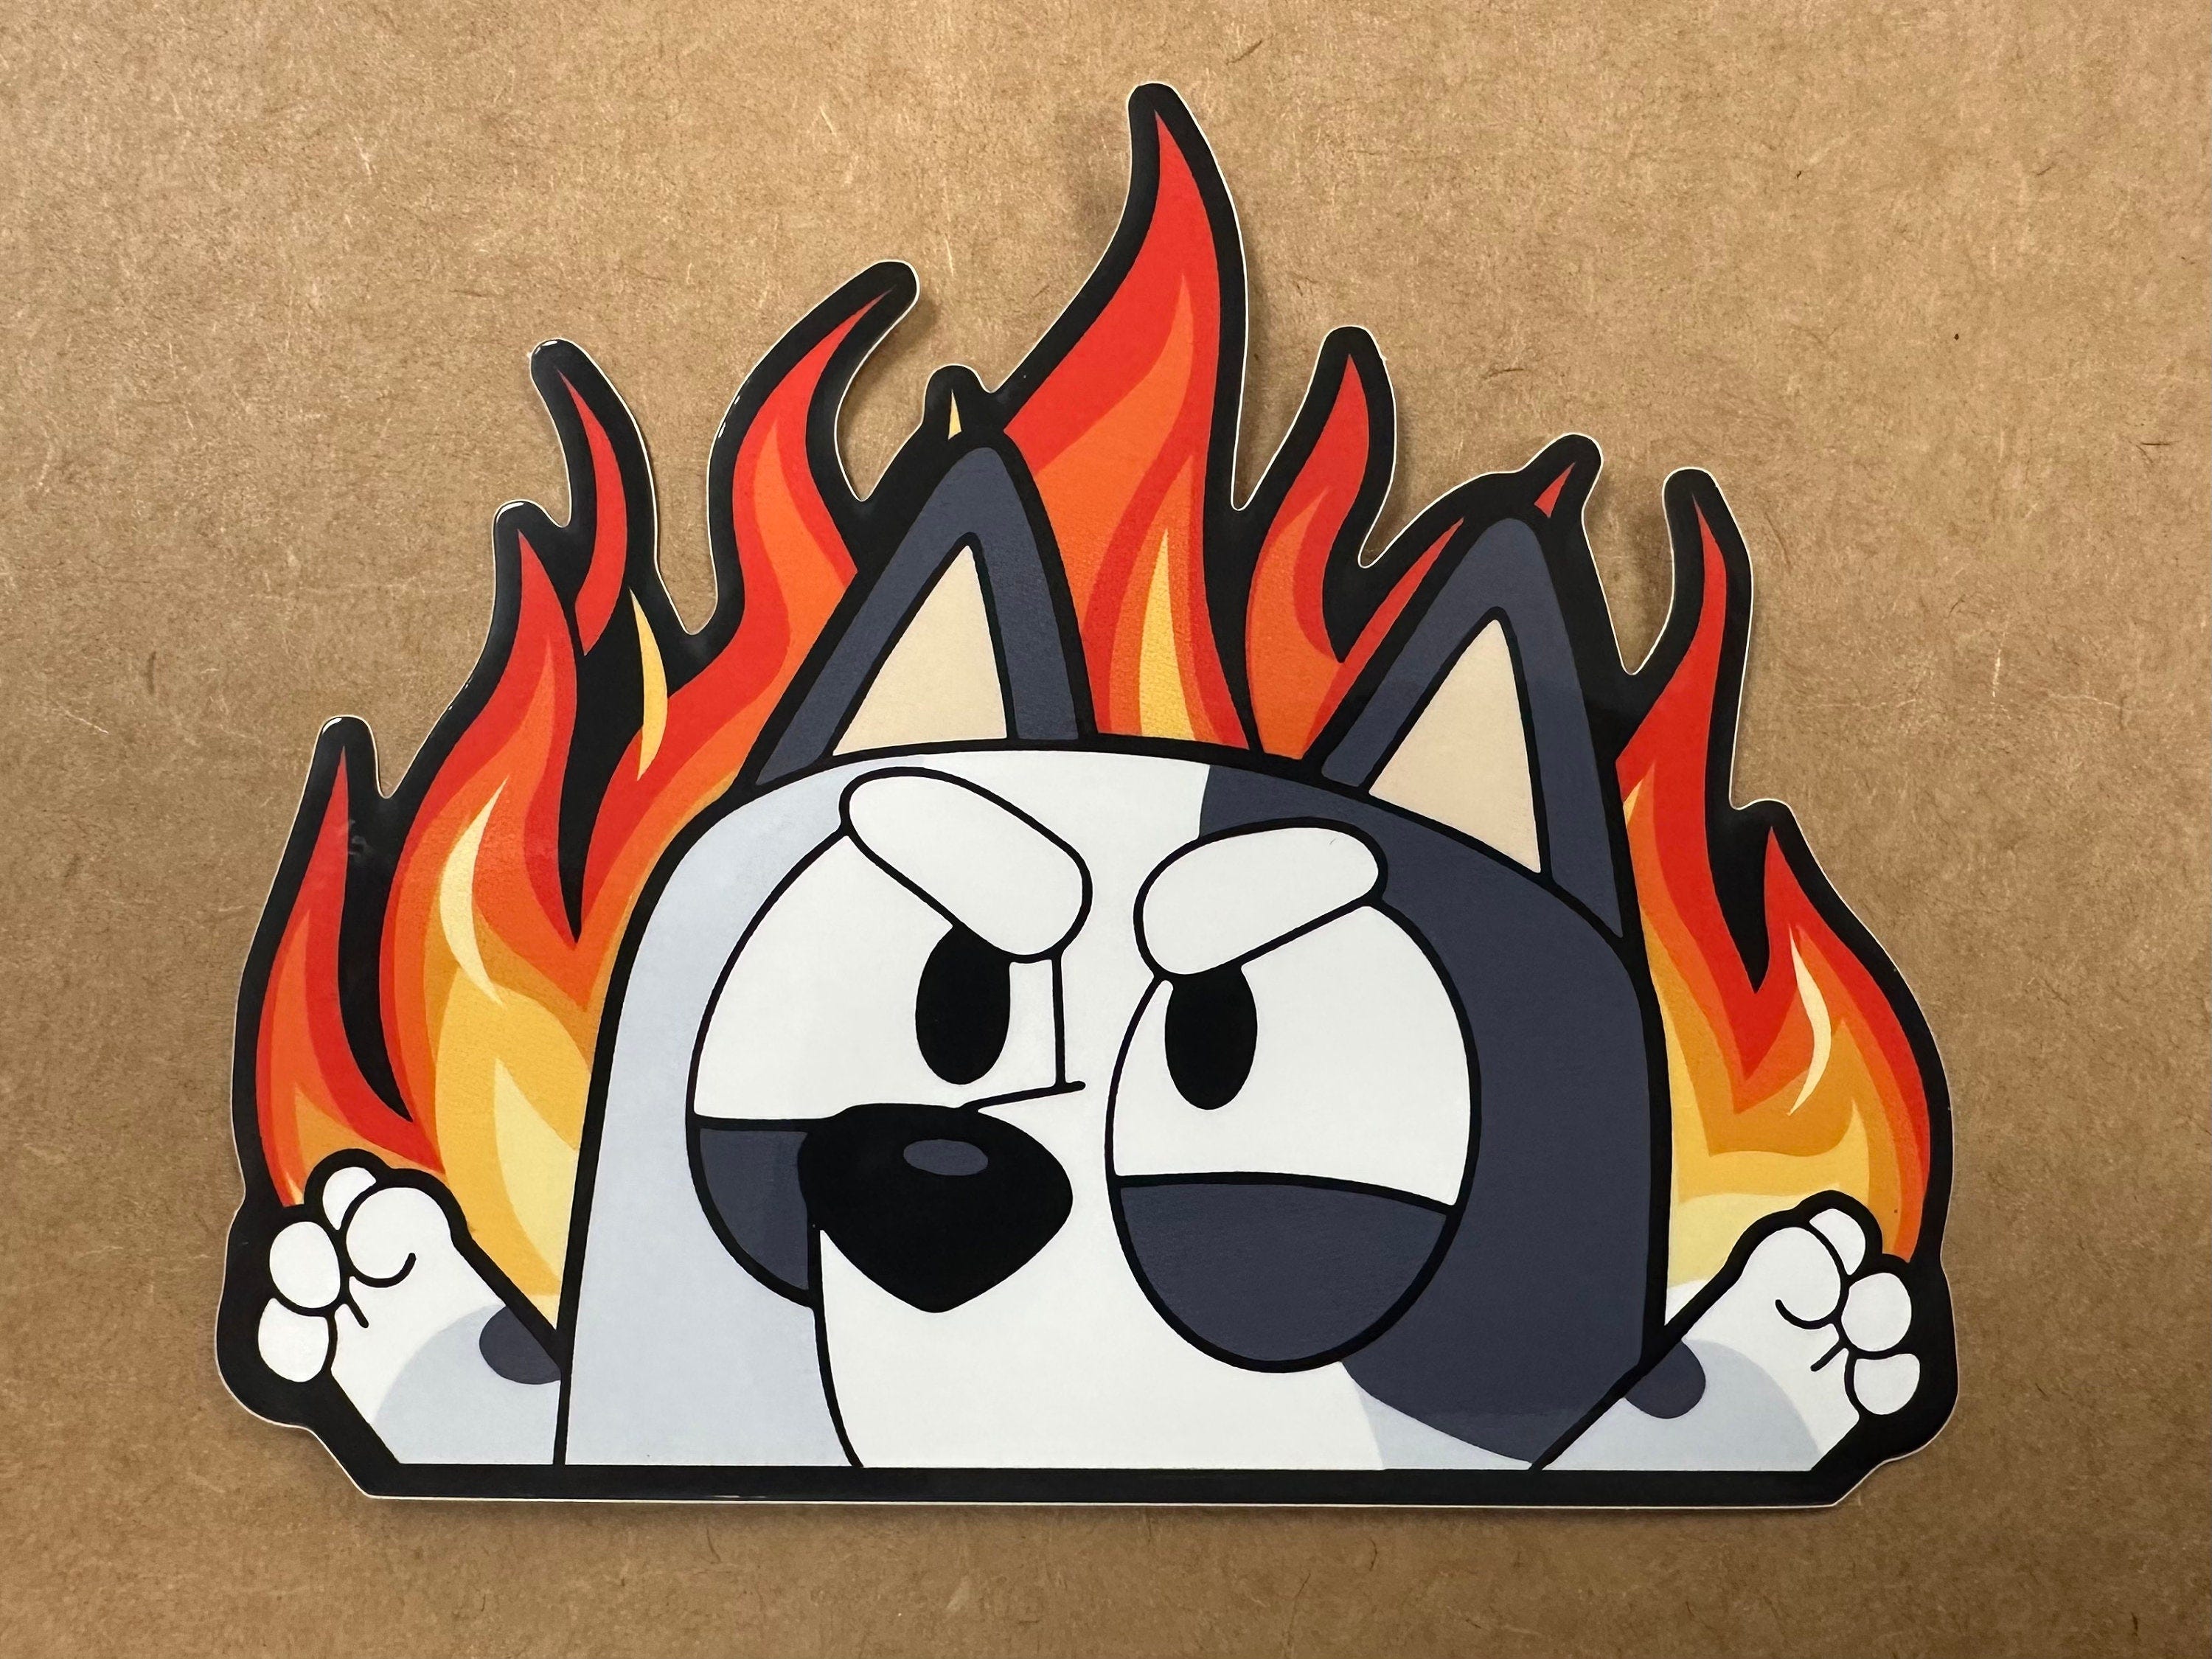 Muffins peeker flame dog| family peeker stickers | Funny decal | Truck decal | car window sticker decal| blue dog stickers